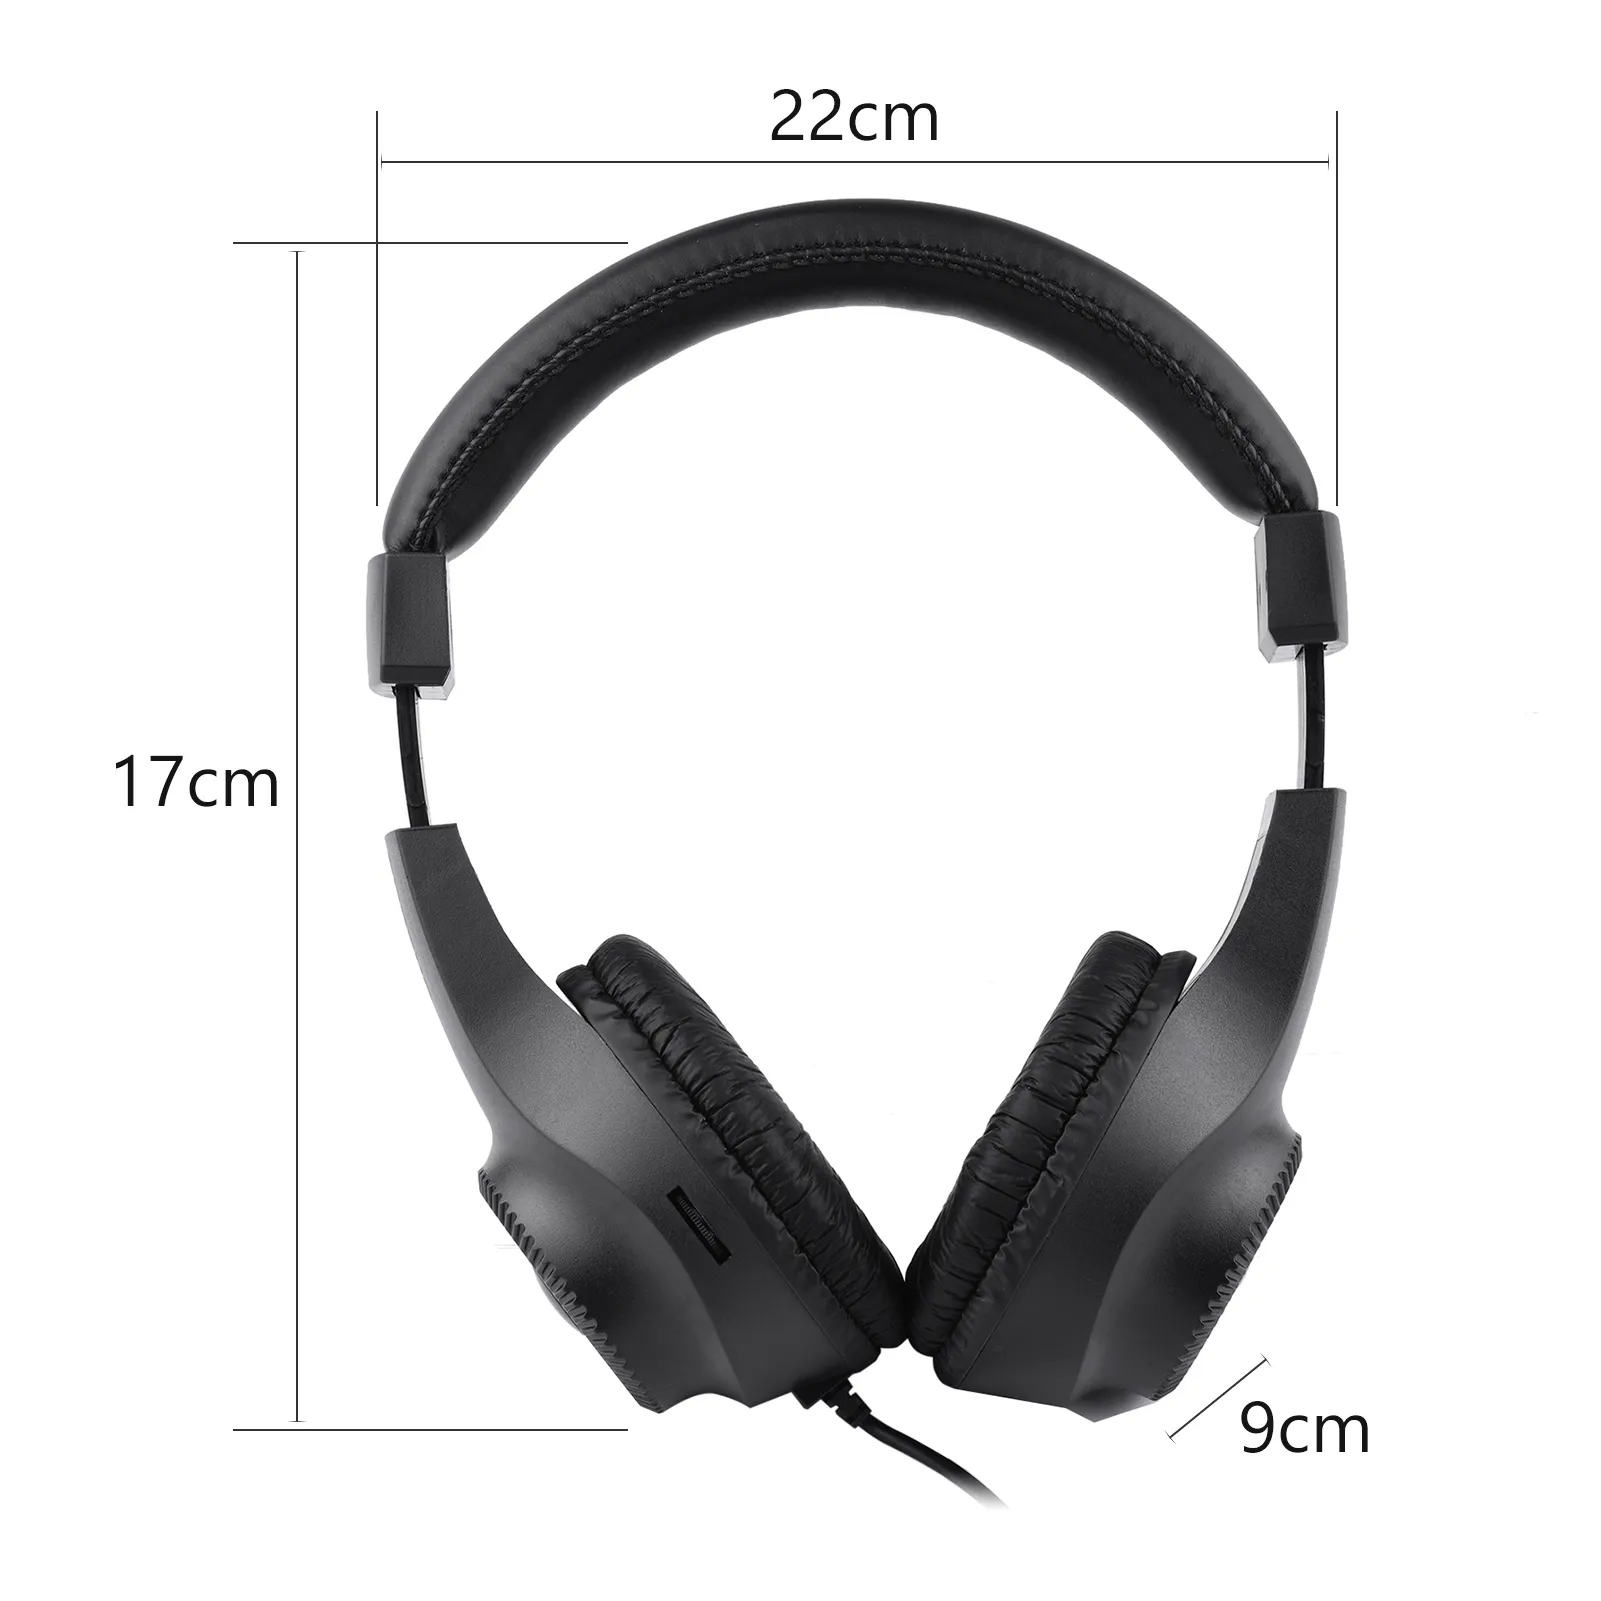 Wired Stereo Monitor Headphones Over-ear Headset with 50mm Driver 6.5mm Plug for Recording Monitoring Music (NOT for PC)